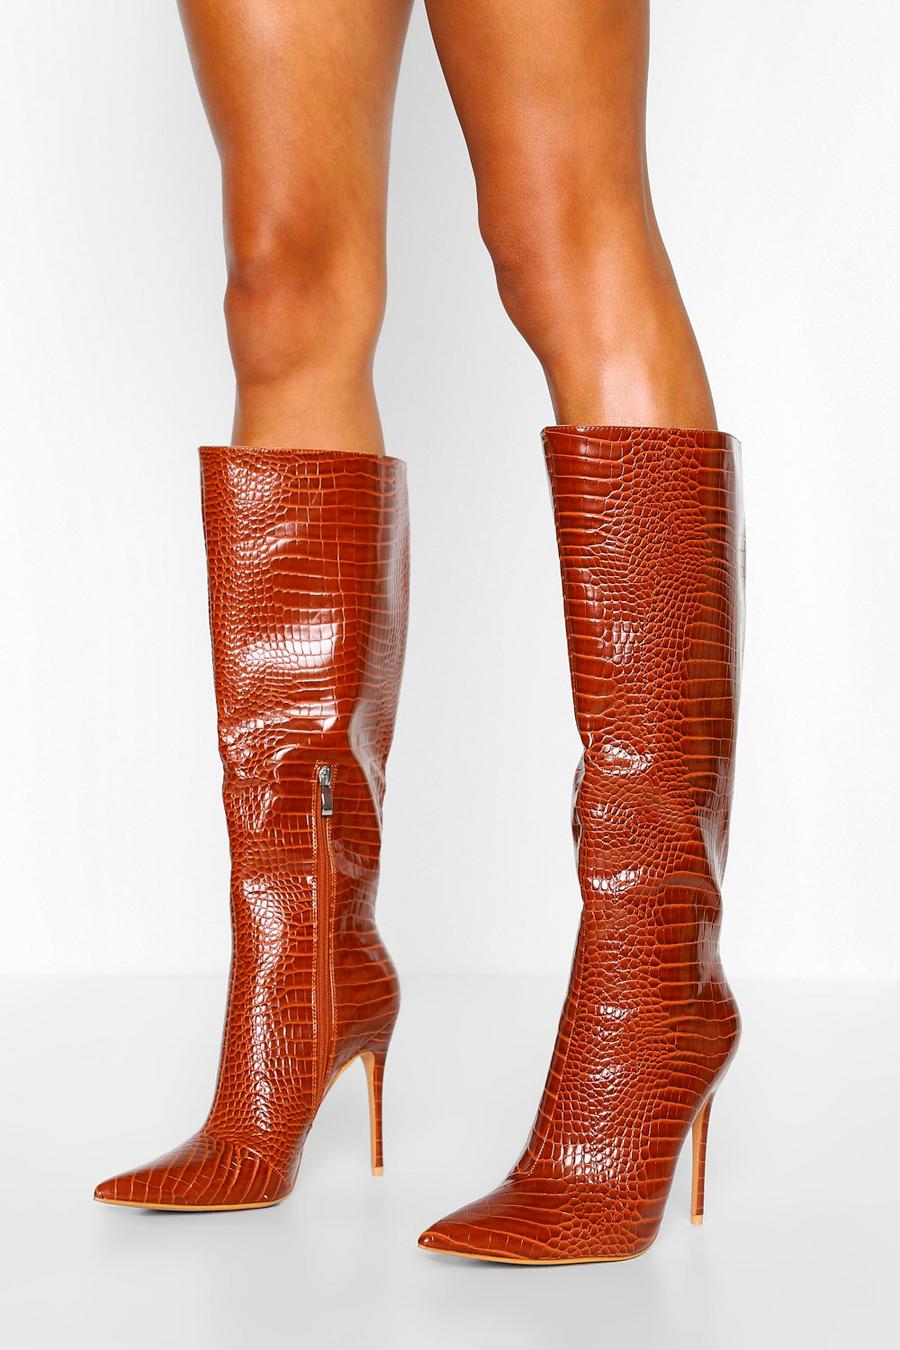 Brown Croc Pointed Toe Stiletto Heel Knee High Boots image number 1